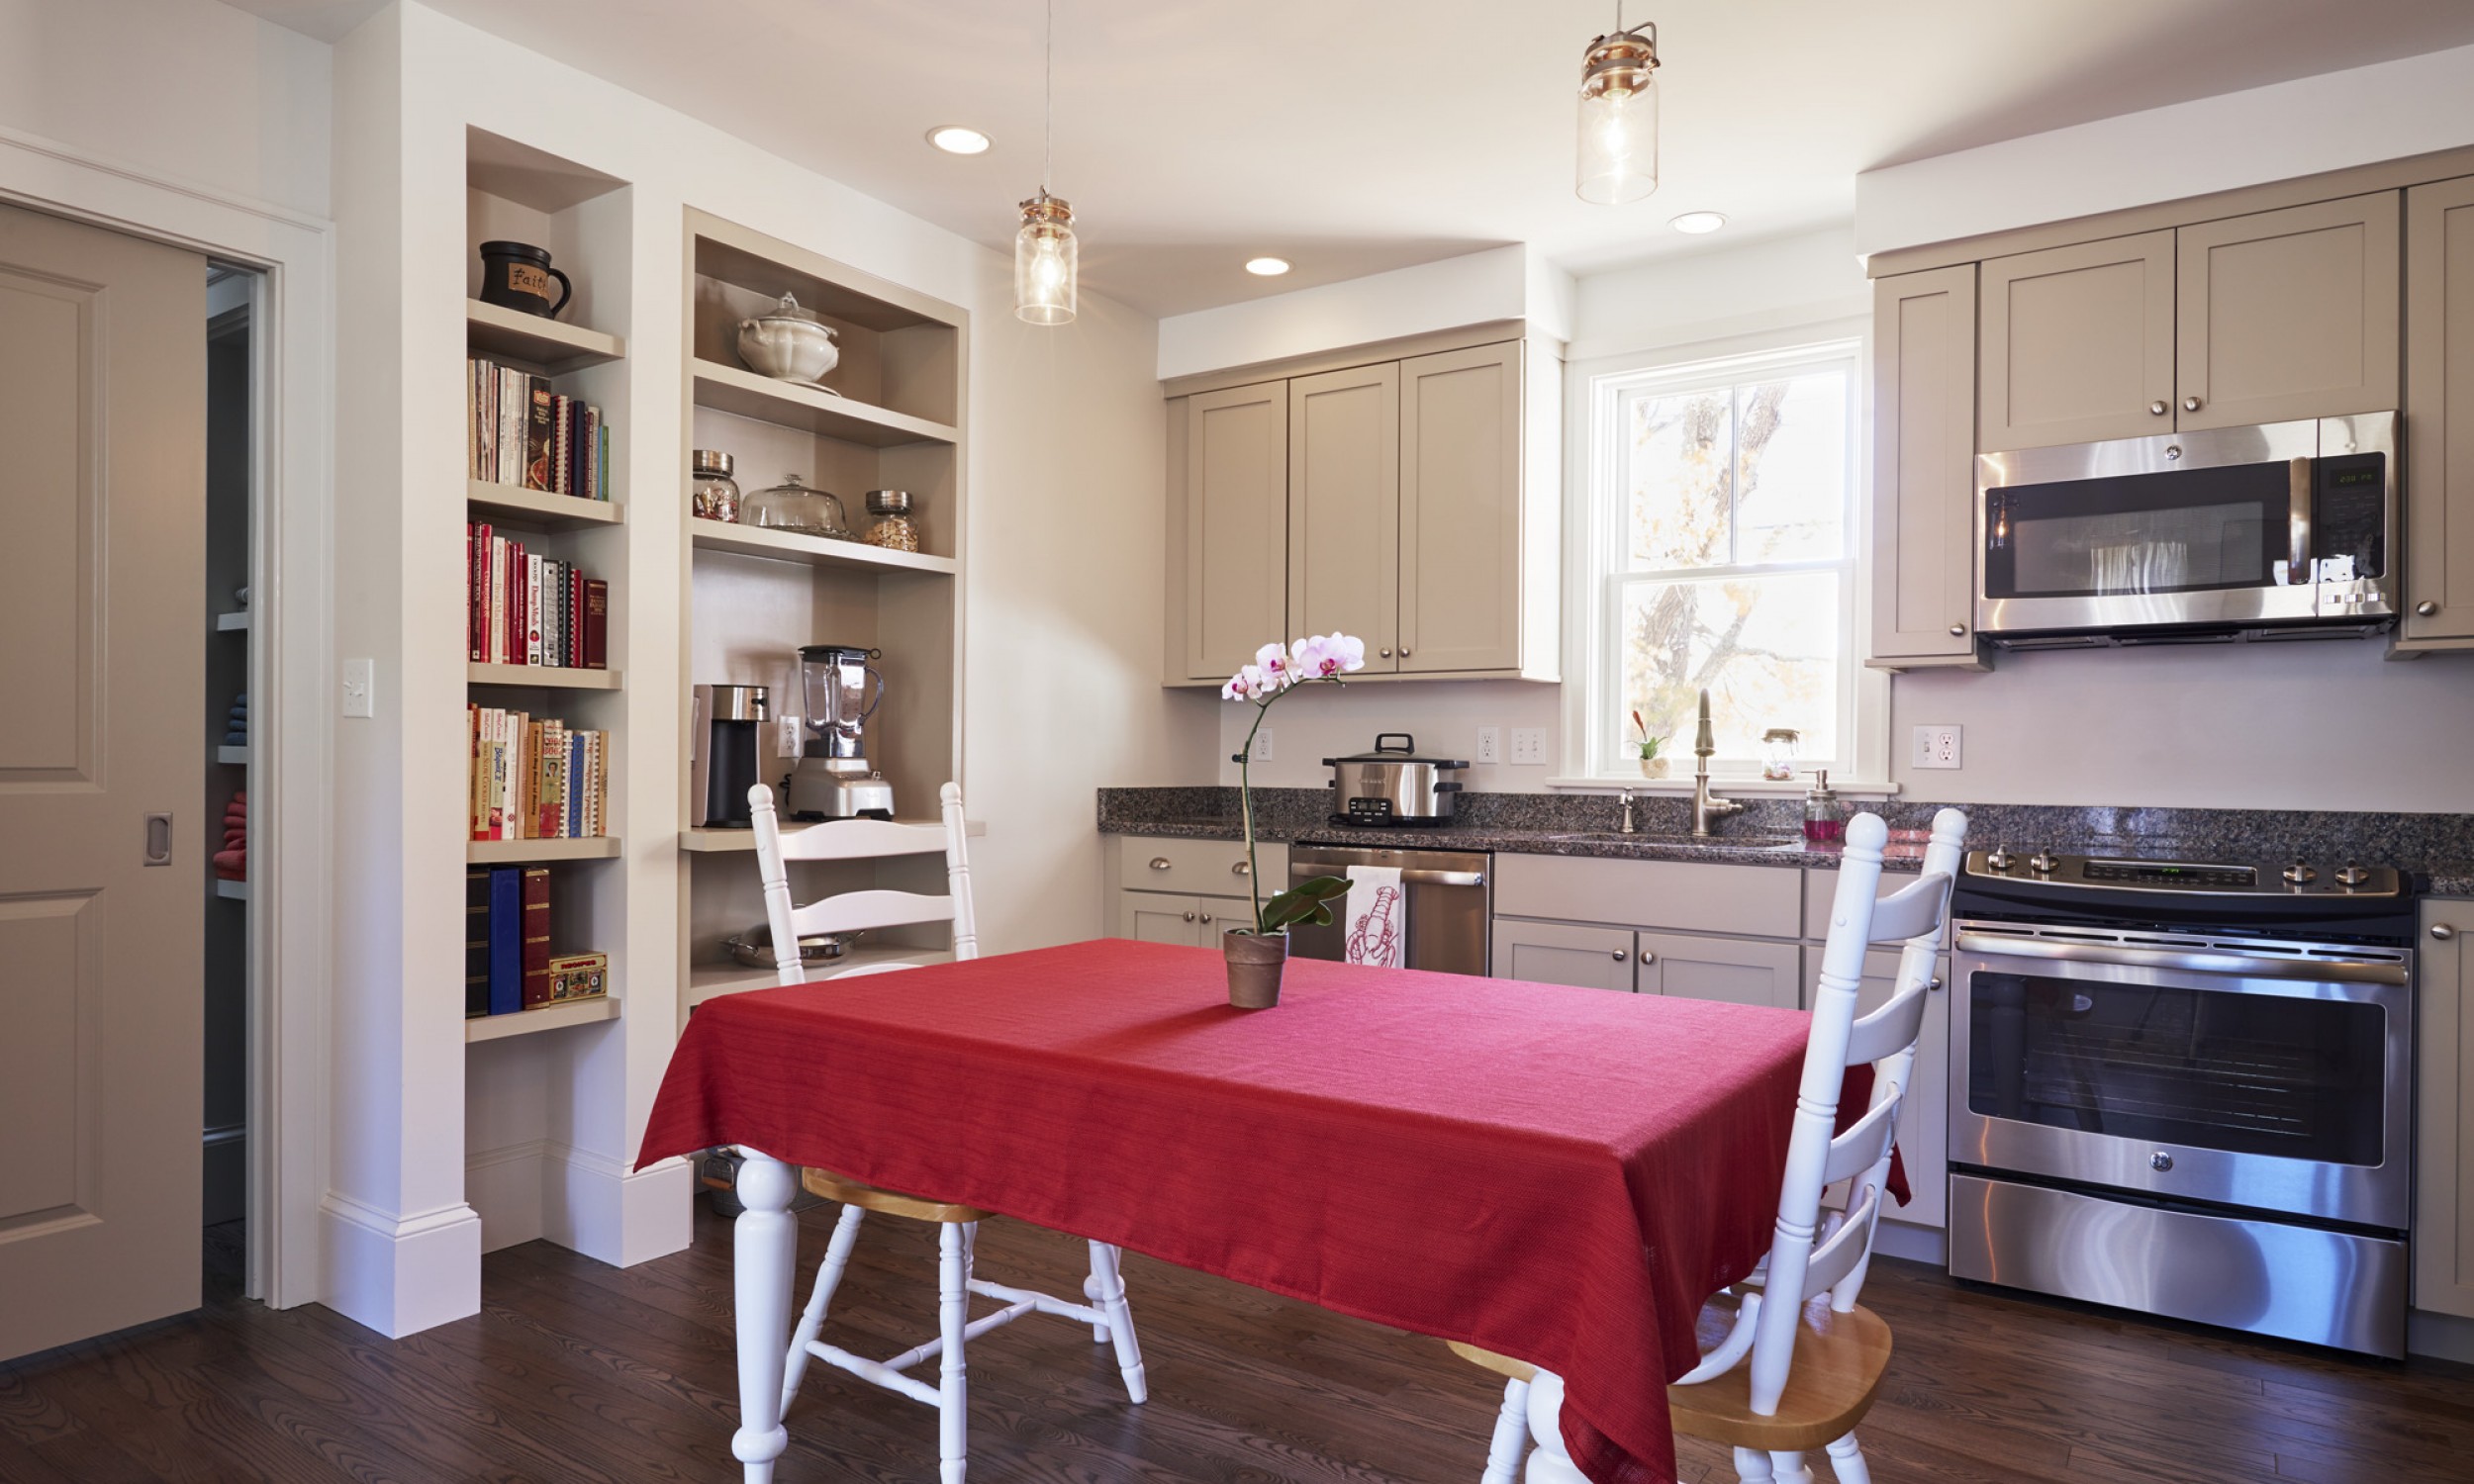 Eat-in Kitchen, Built-in shelves, Maine Architect